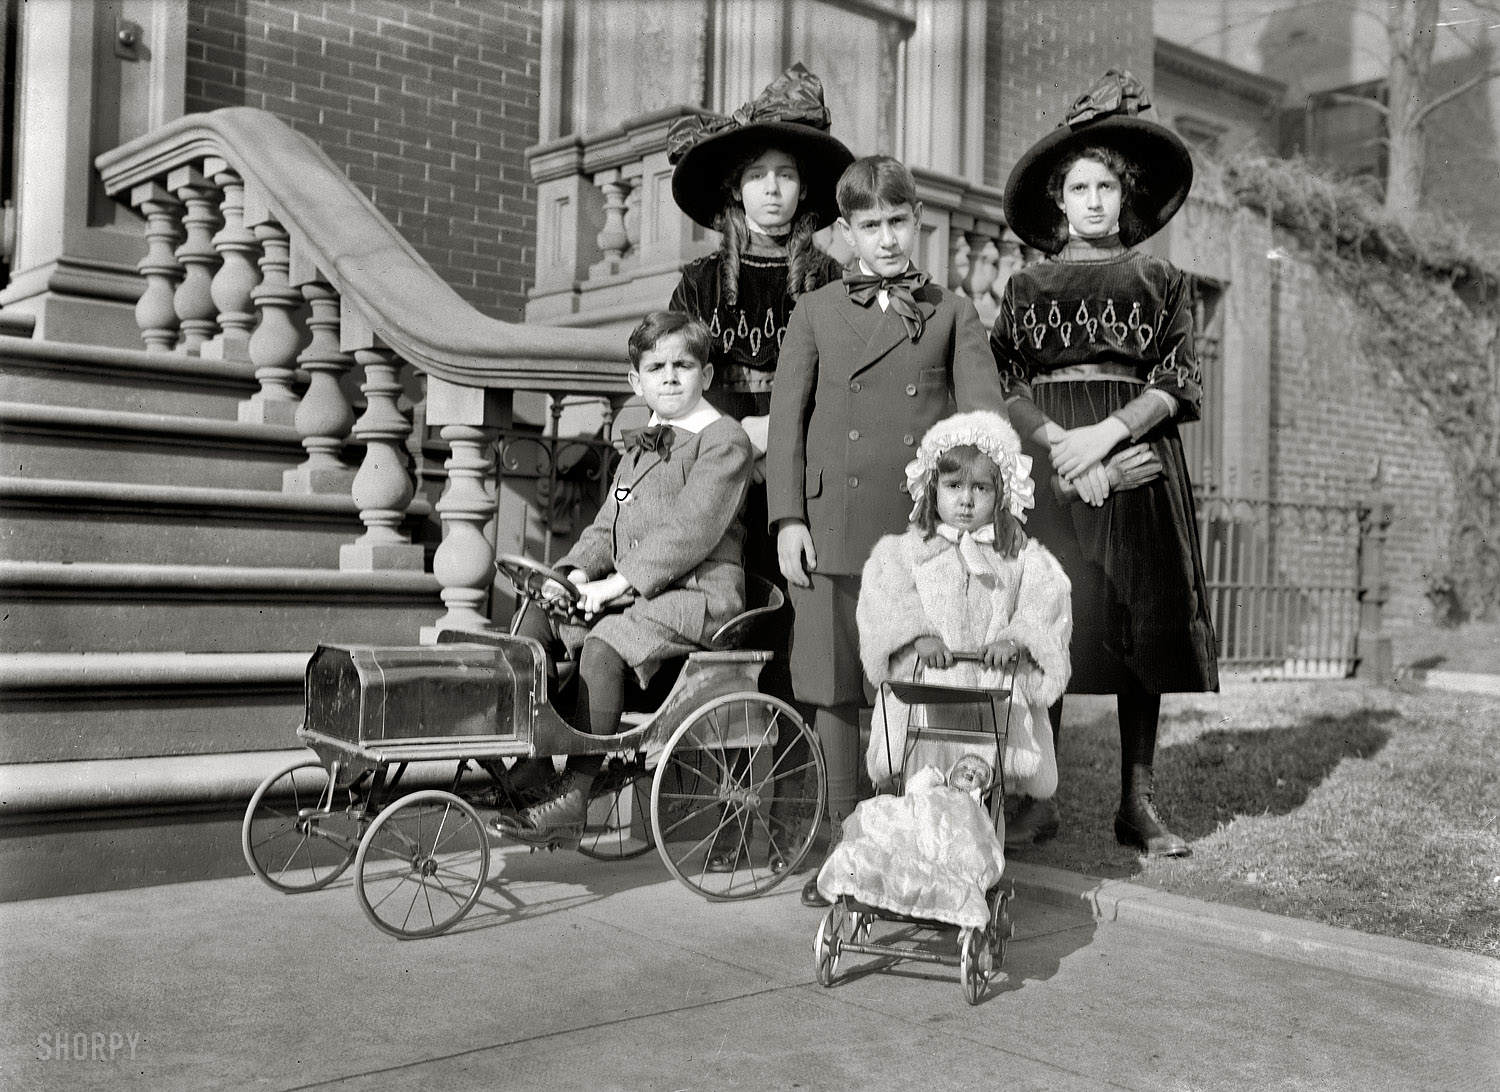 "Naon children, 1912." Romulo Naon Jr., son of the Argentinean ambassador, and siblings. I can't shake the feeling that some Goreyesque mishap is about to befall these gloomy tots. Harris & Ewing Collection glass negative. View full size.